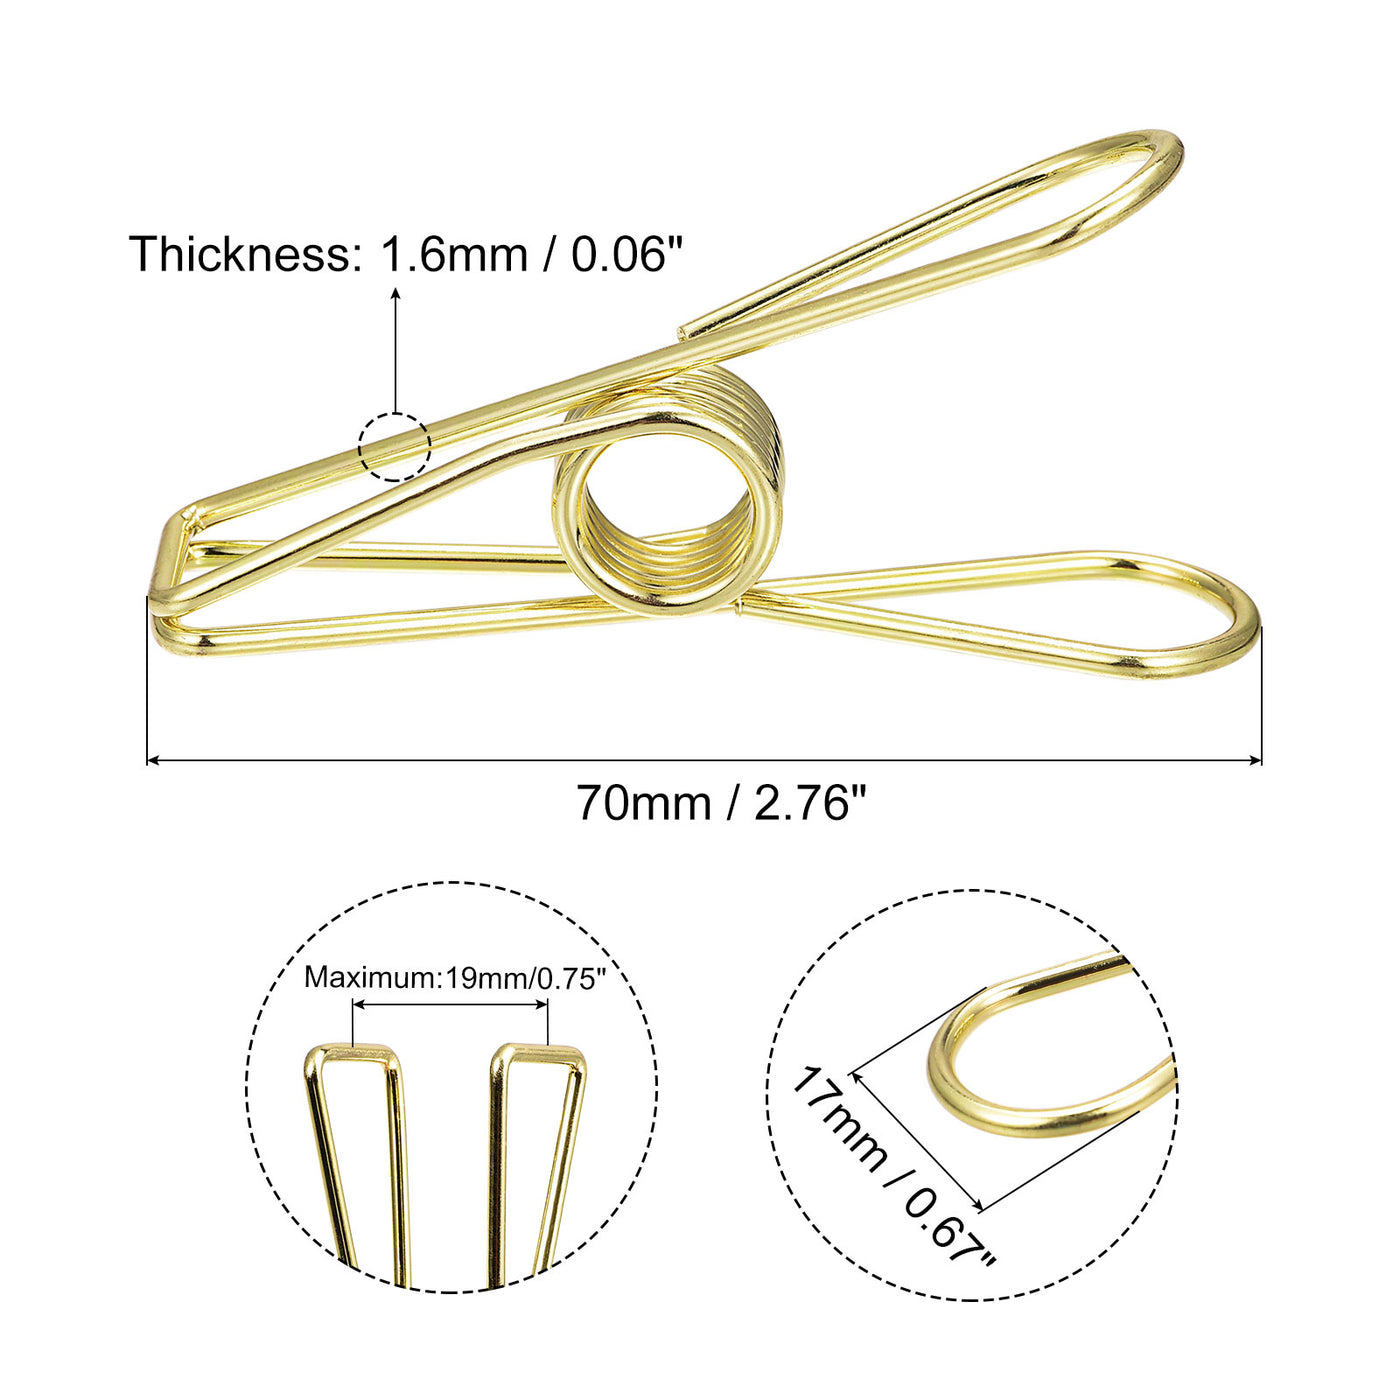 uxcell Uxcell Tablecloth Clips, 70mm Carbon Steel Clamps for Fix Table Cloth, Gold Tone 14 Pcs